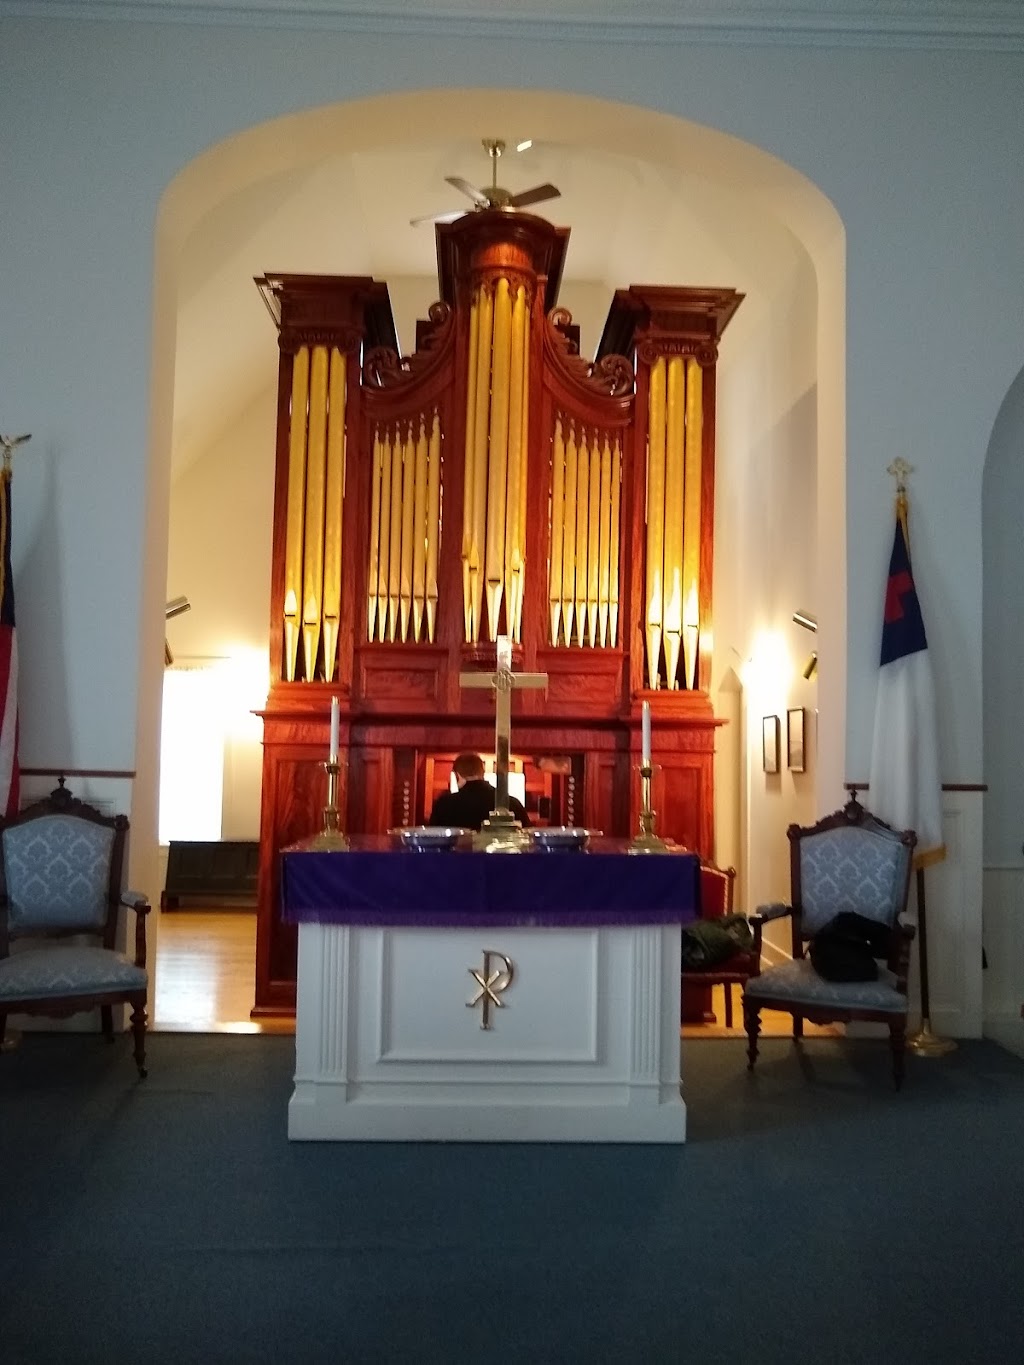 Second Congregational Church of Middle Haddam | 52 Middle Haddam Rd, Middle Haddam, CT 06456 | Phone: (860) 267-2828